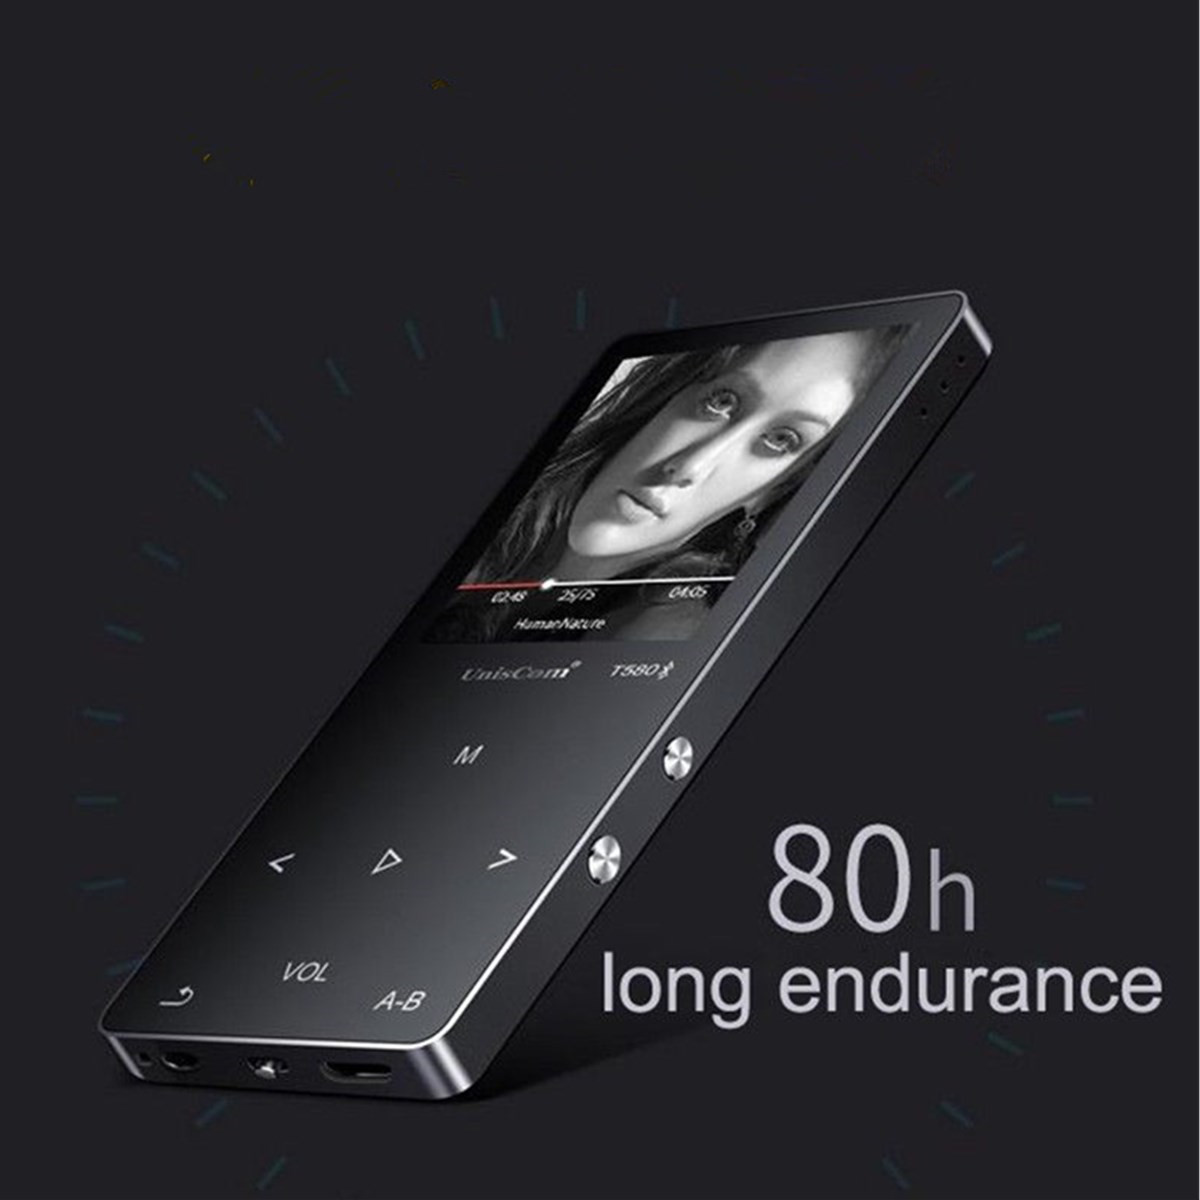 Uniscom 8G 1.8 Inch Screen bluetooth Lossless HIFI MP3 Music Player Support A-B Repeat Voice Record 29